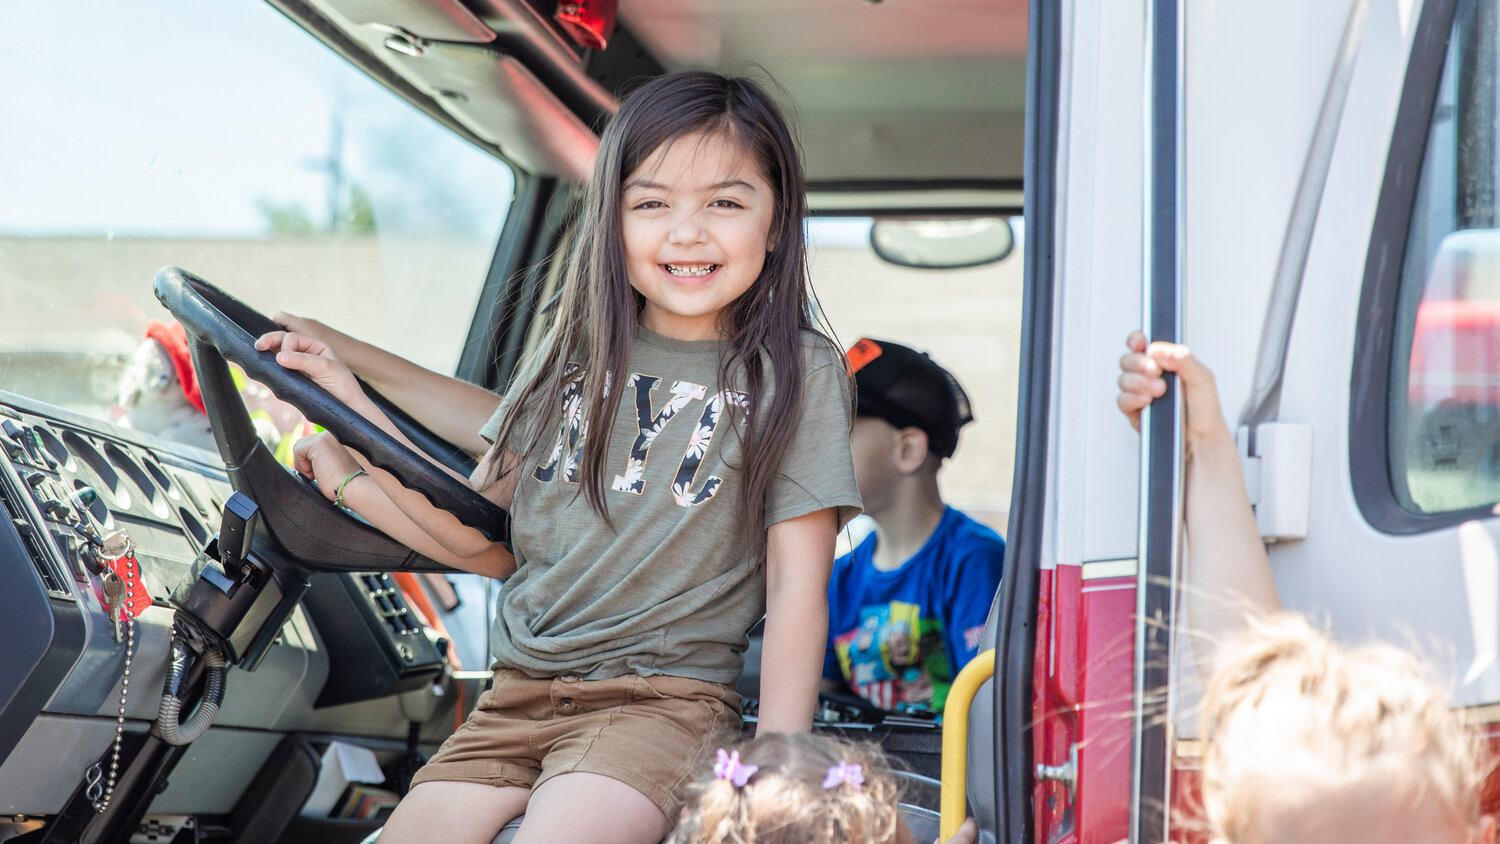 Kindergarten students smile while sitting behind the wheel of a fire engine during a visit to Lewis County Fire District 5 in Napavine on Tuesday, June 7.